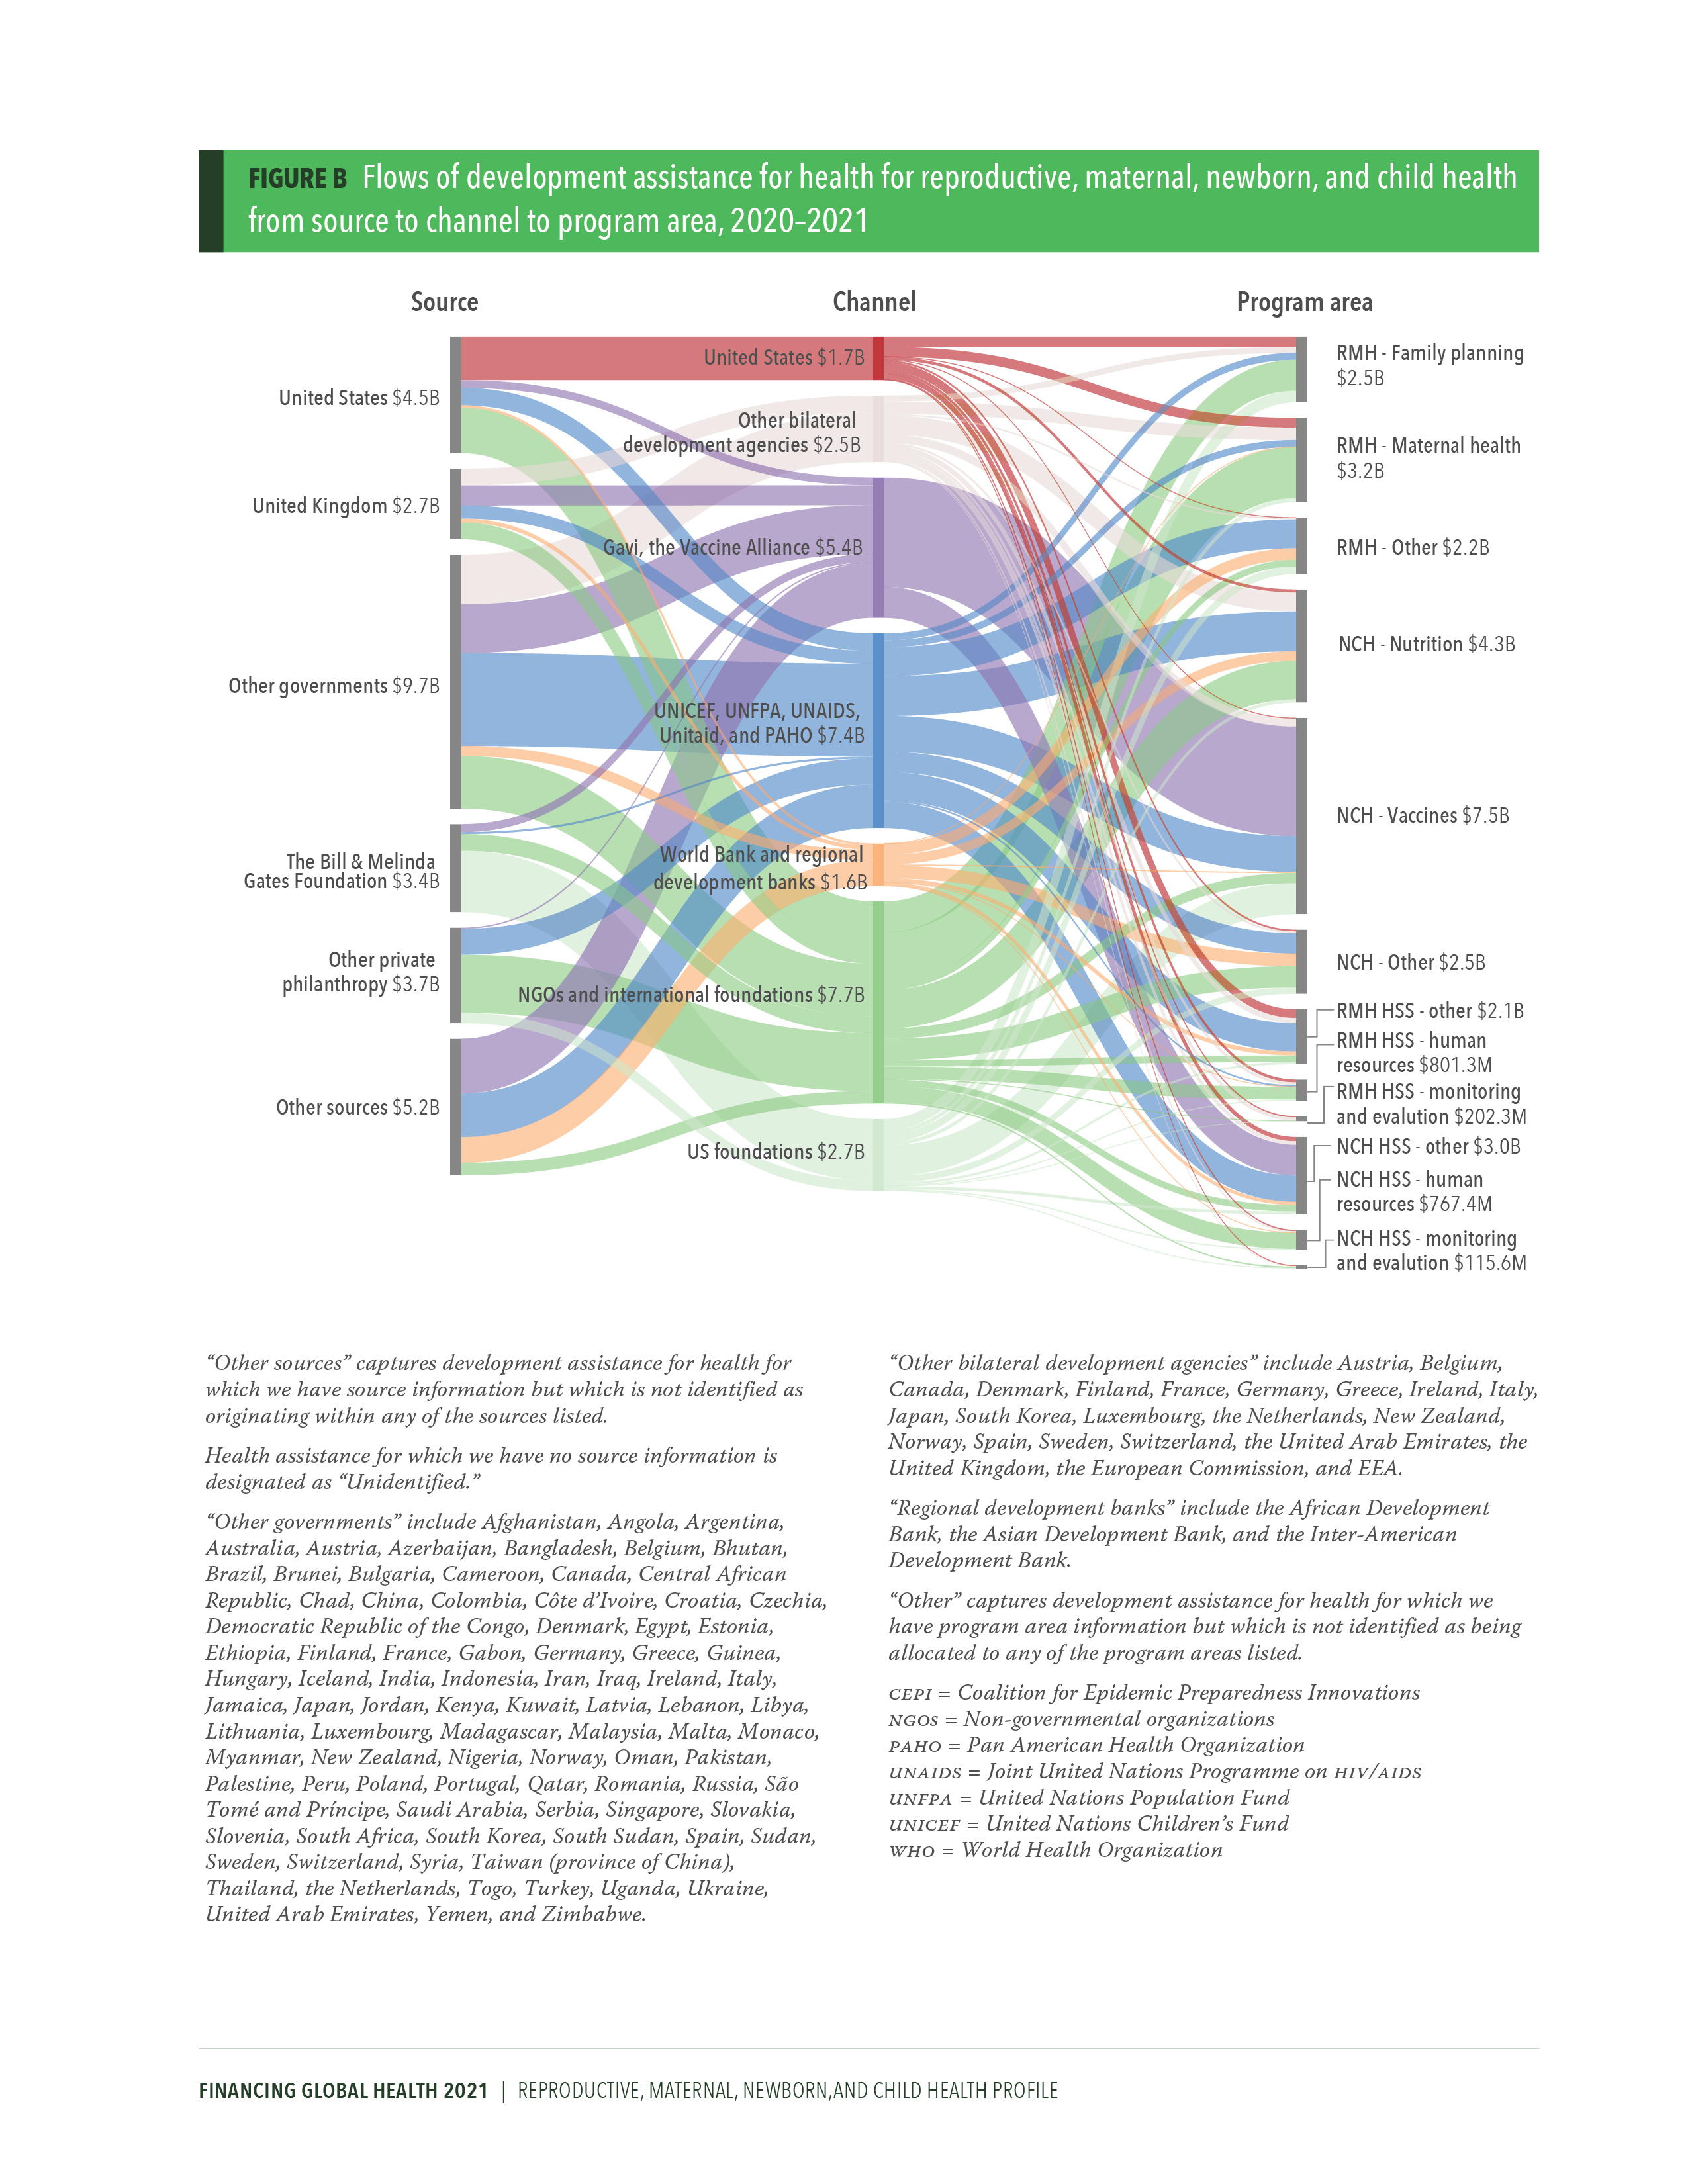 Disease spending profile for reproductive, maternal, newborn, and child health: page 2 shows a diagram of flows of development assistance for health from source to channel to program area. Download the profile for more details. 